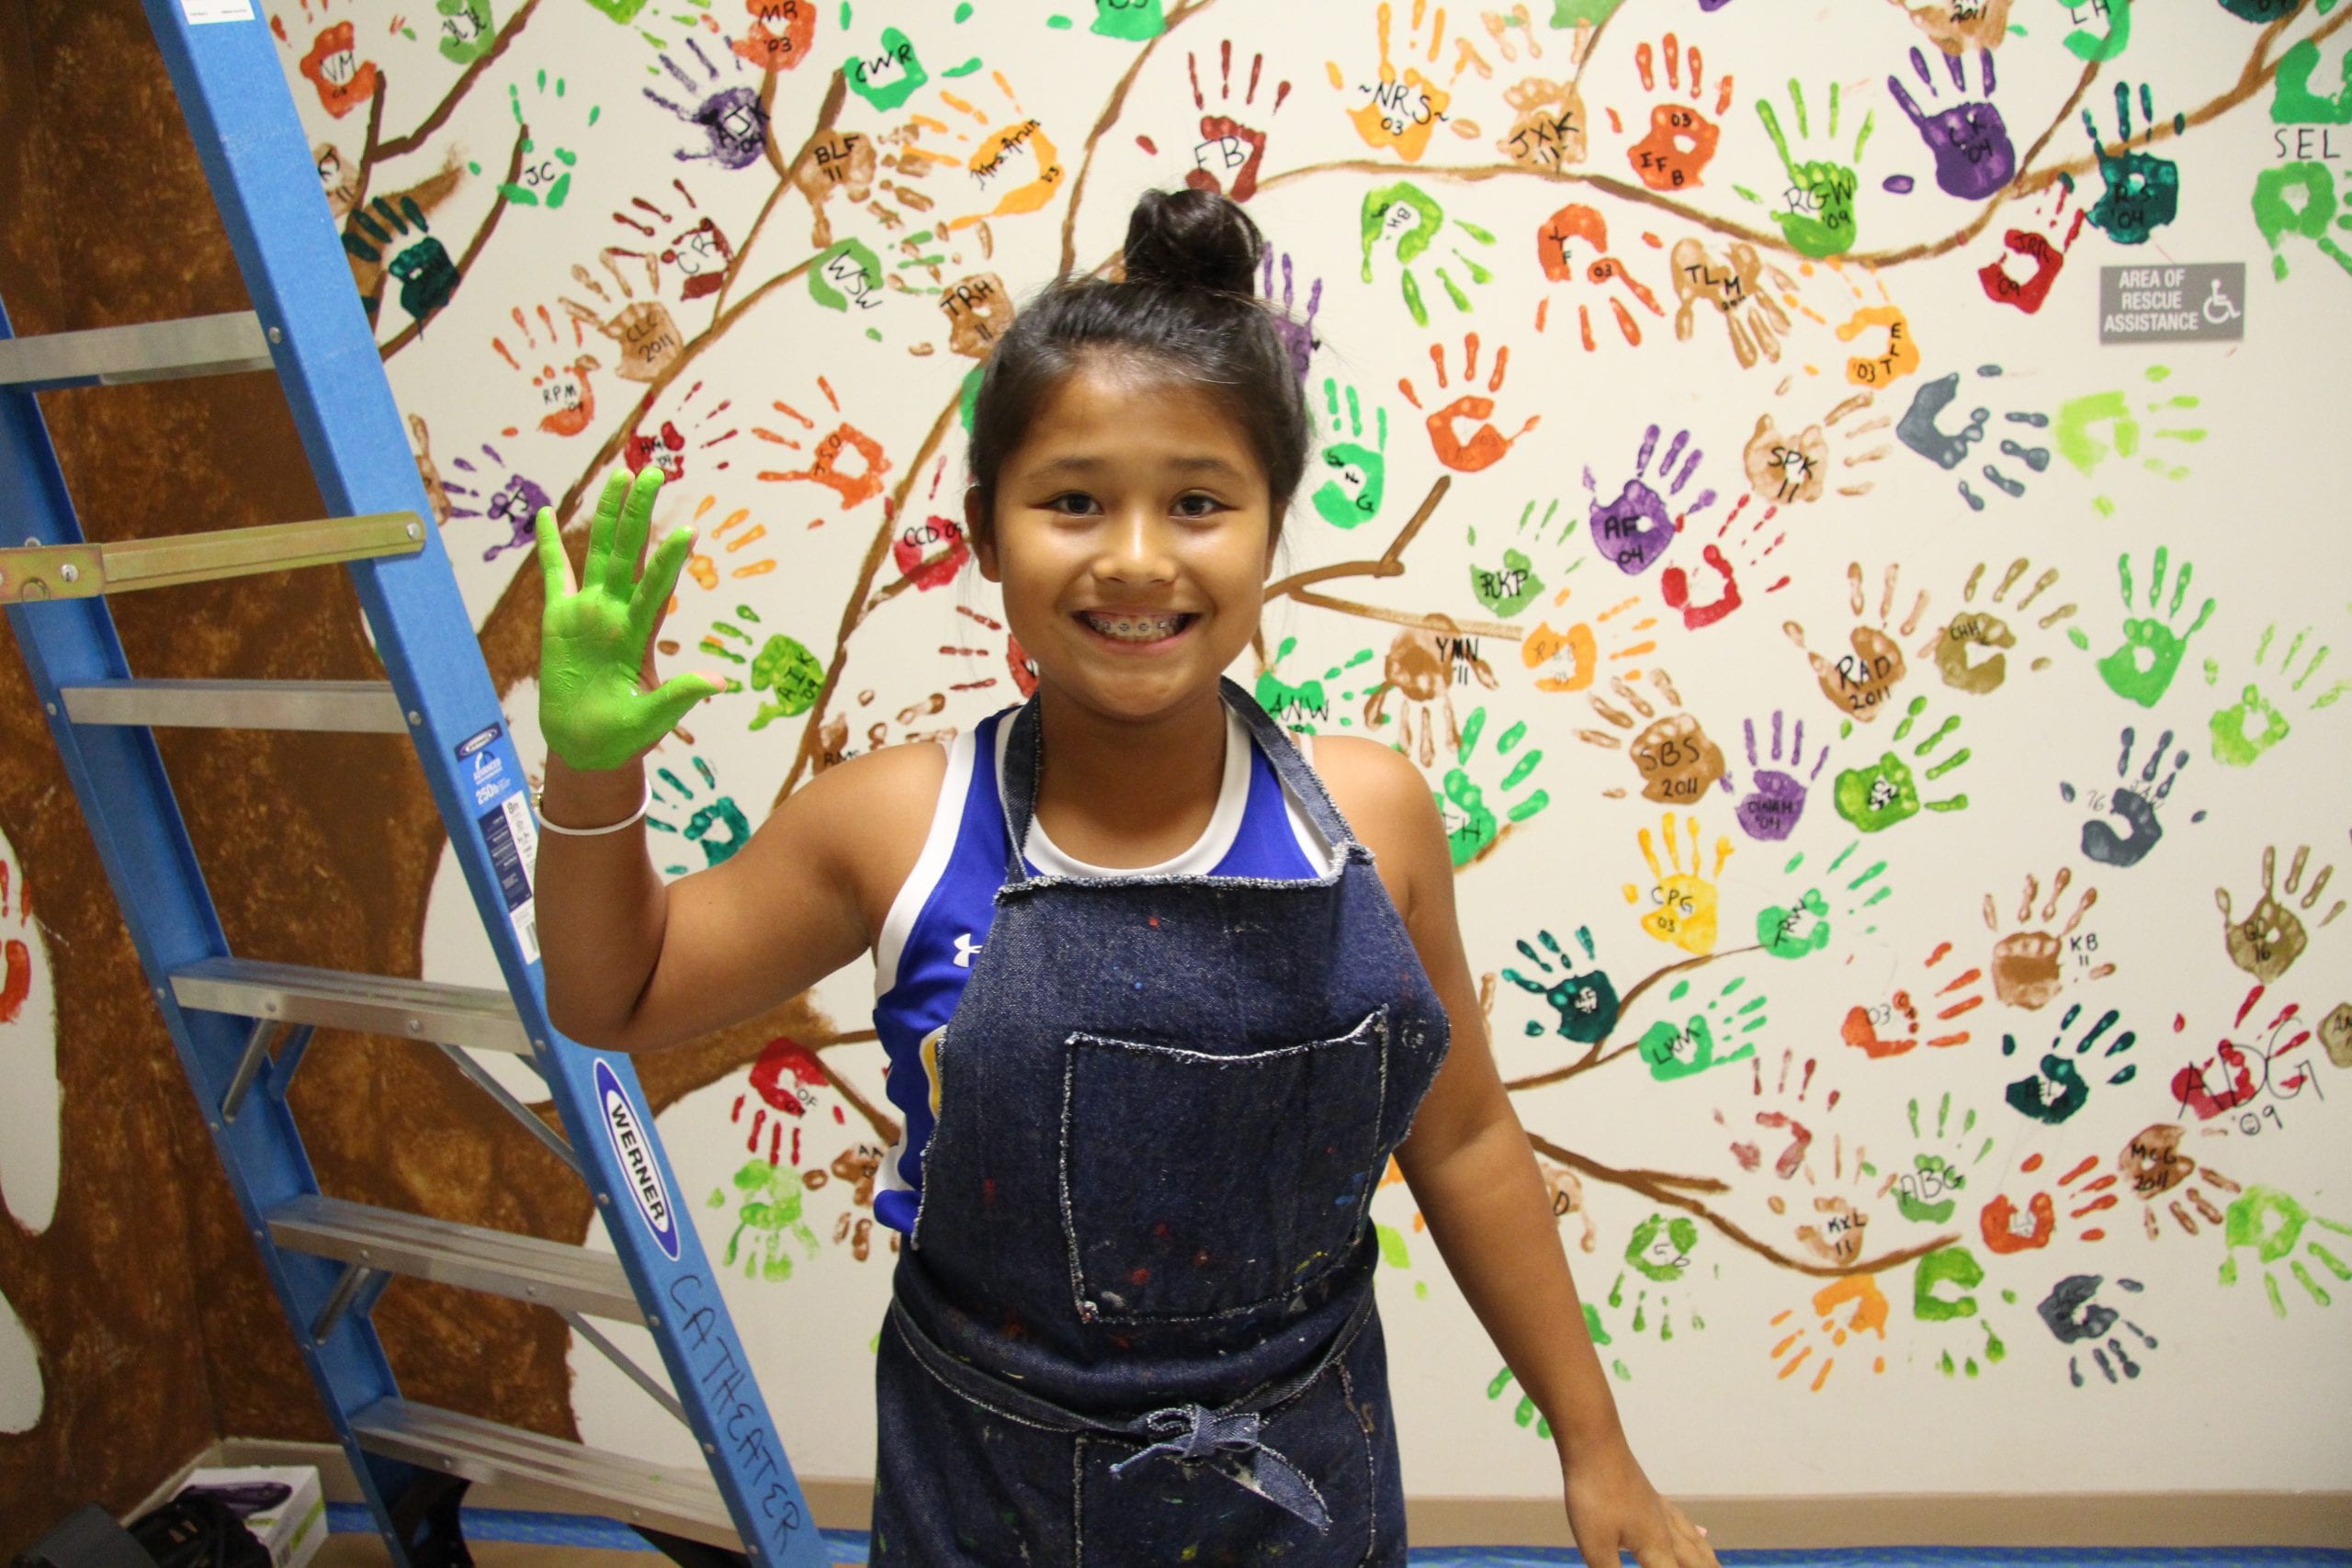 MS student in front of handprint mural